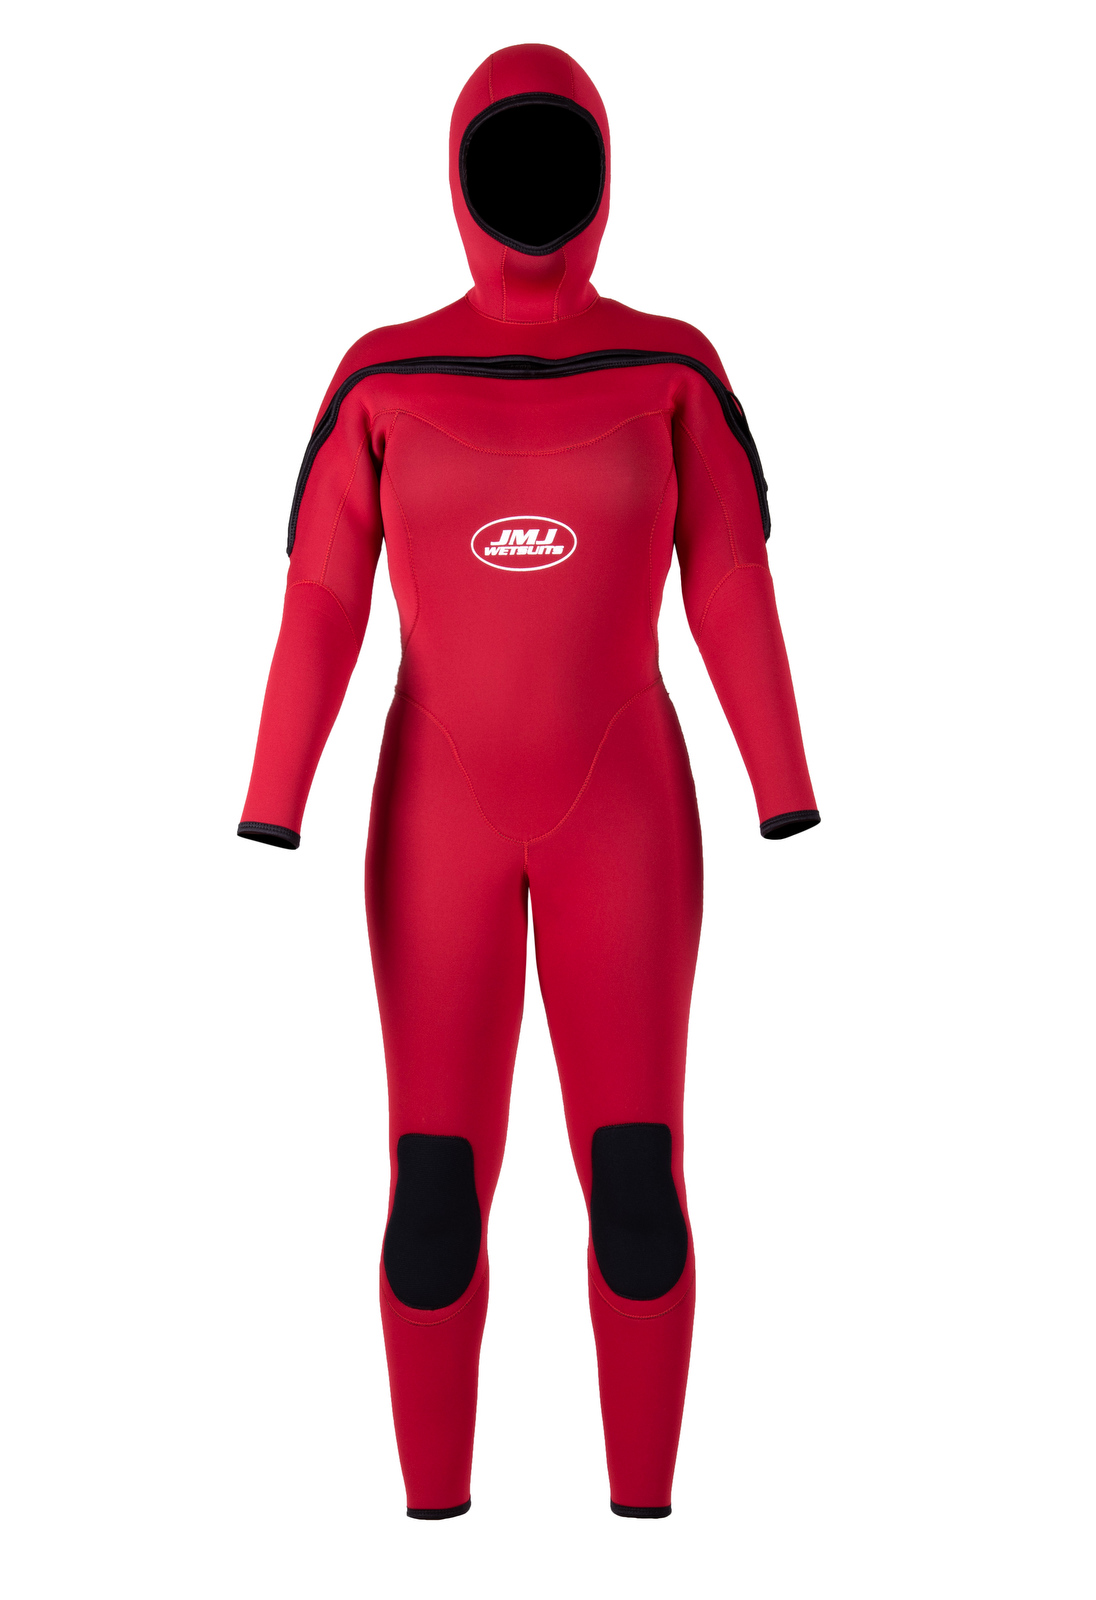 Fullsuit with Attached Hood - JMJ Wetsuits